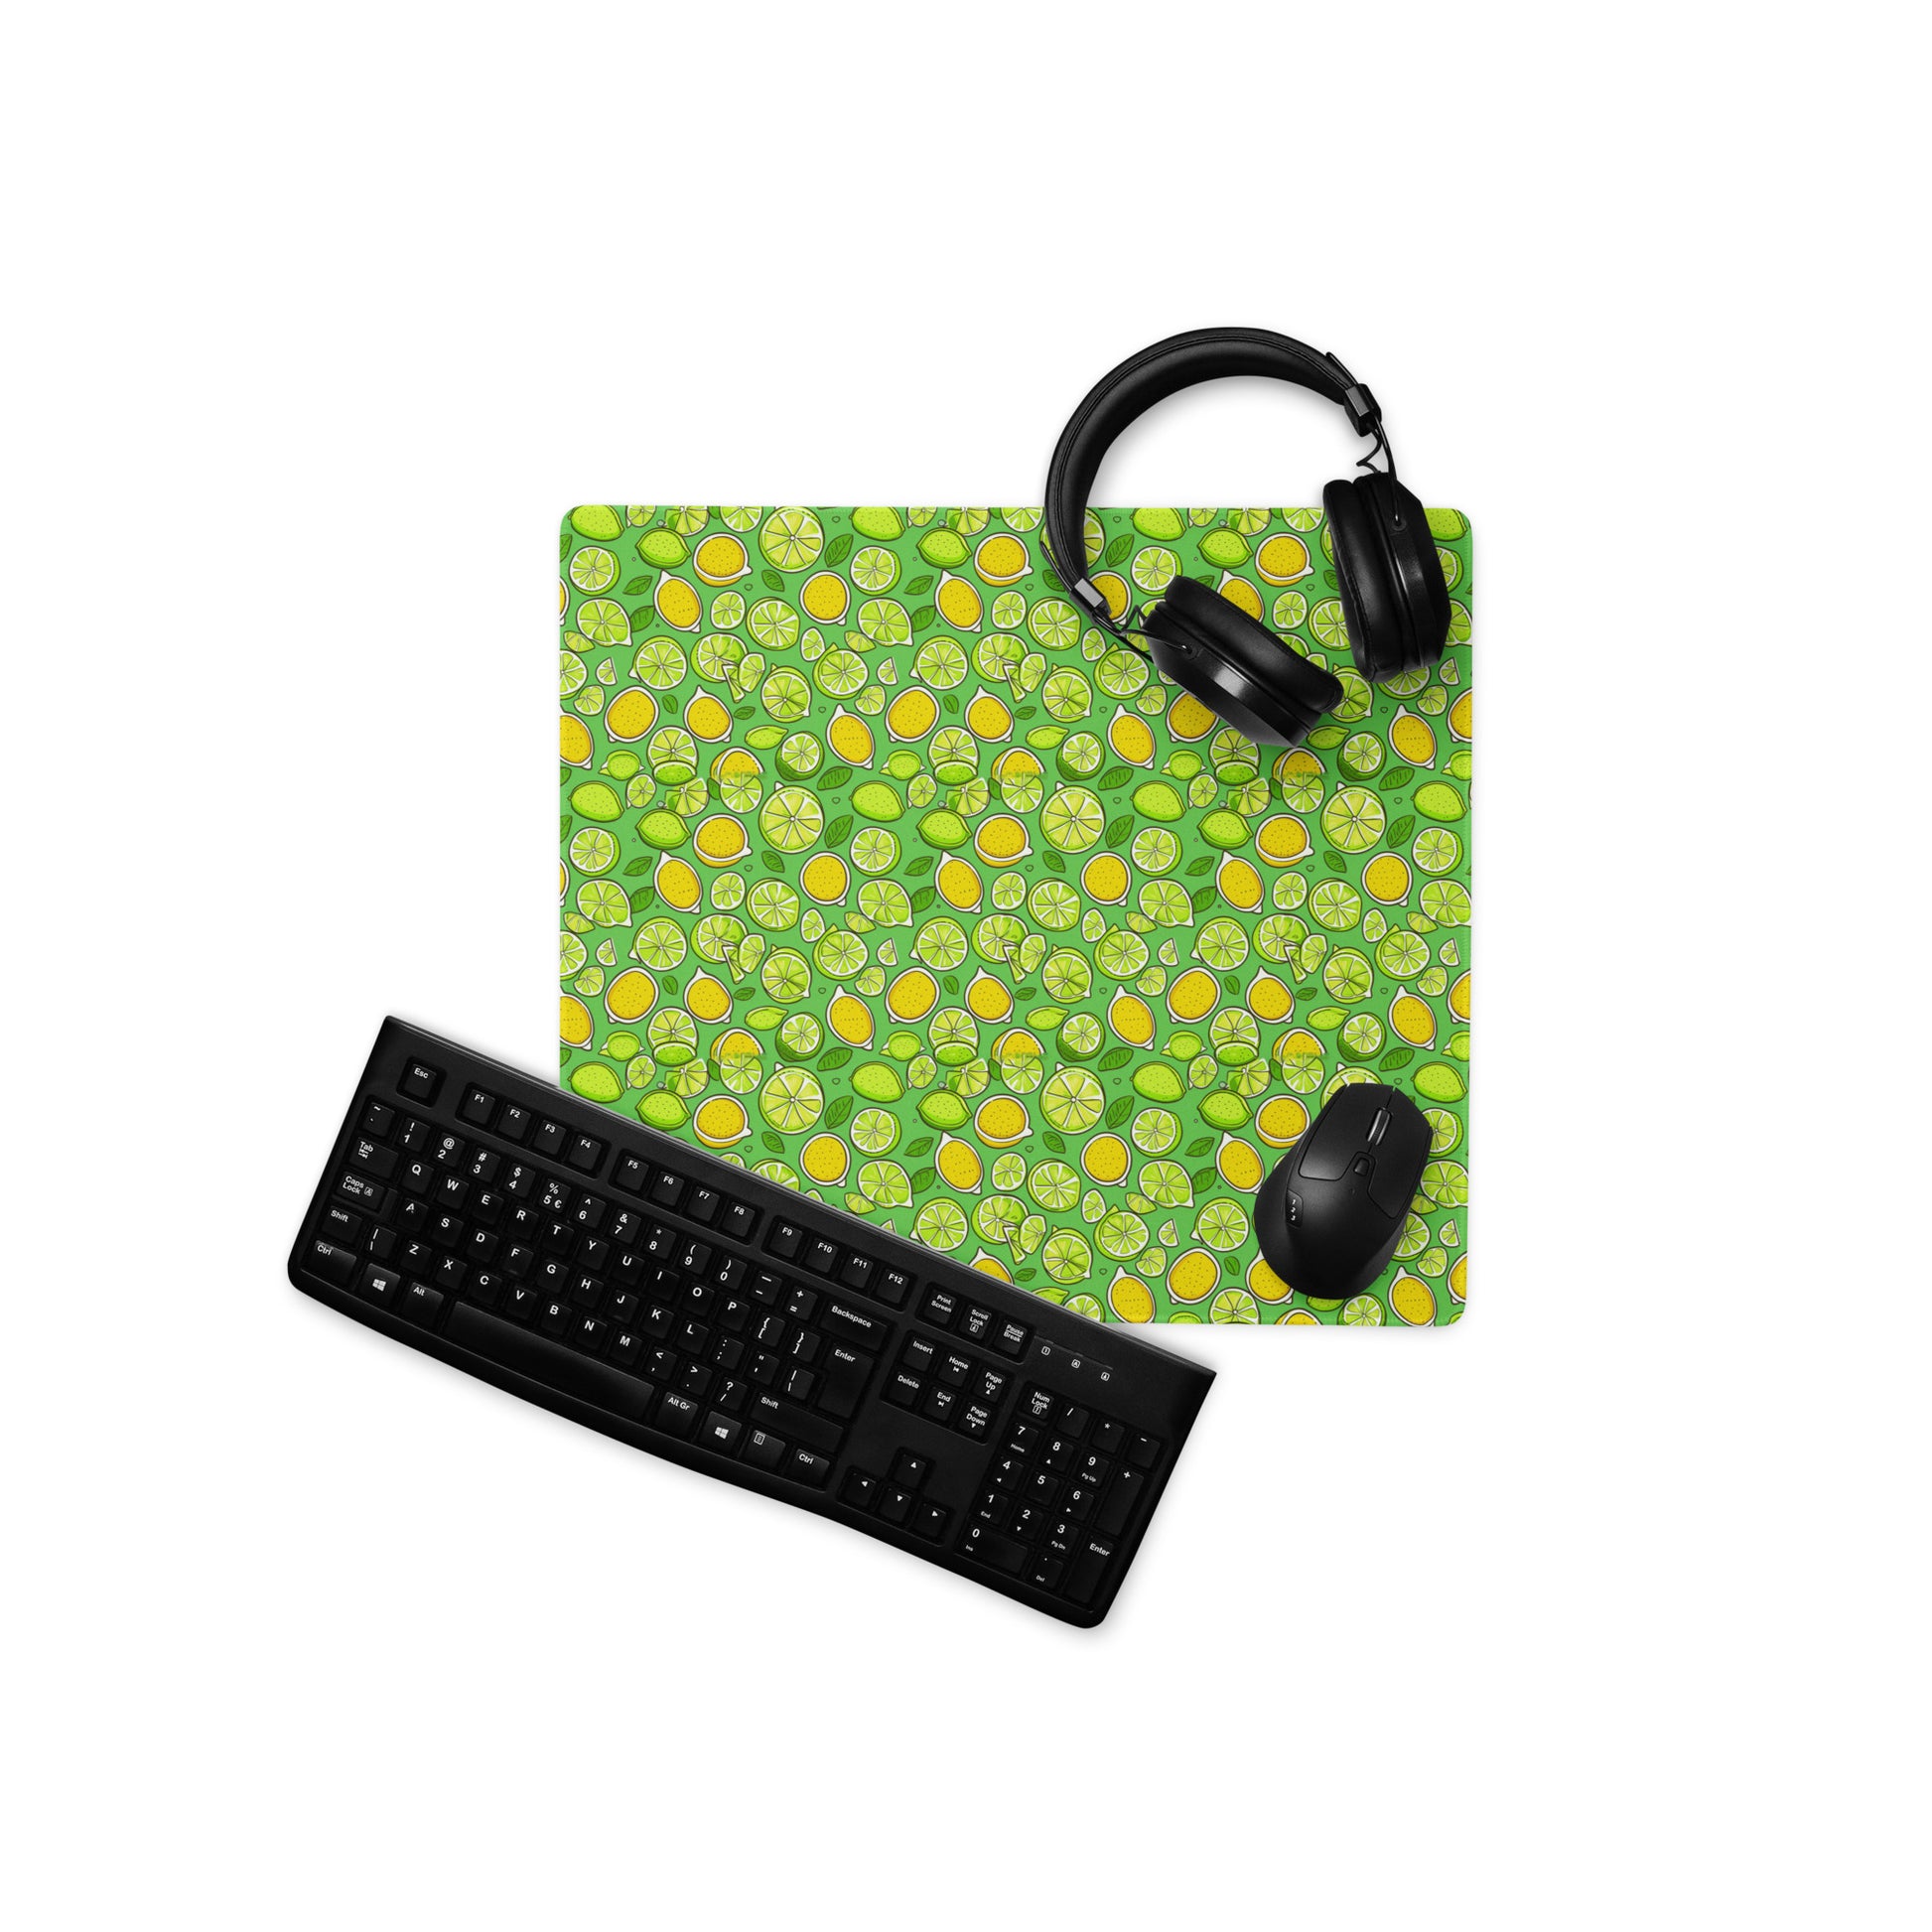 An 18" x 16" gaming desk pad with lemons and limes on a green background. A keyboard, mouse, and headphones sit on it.